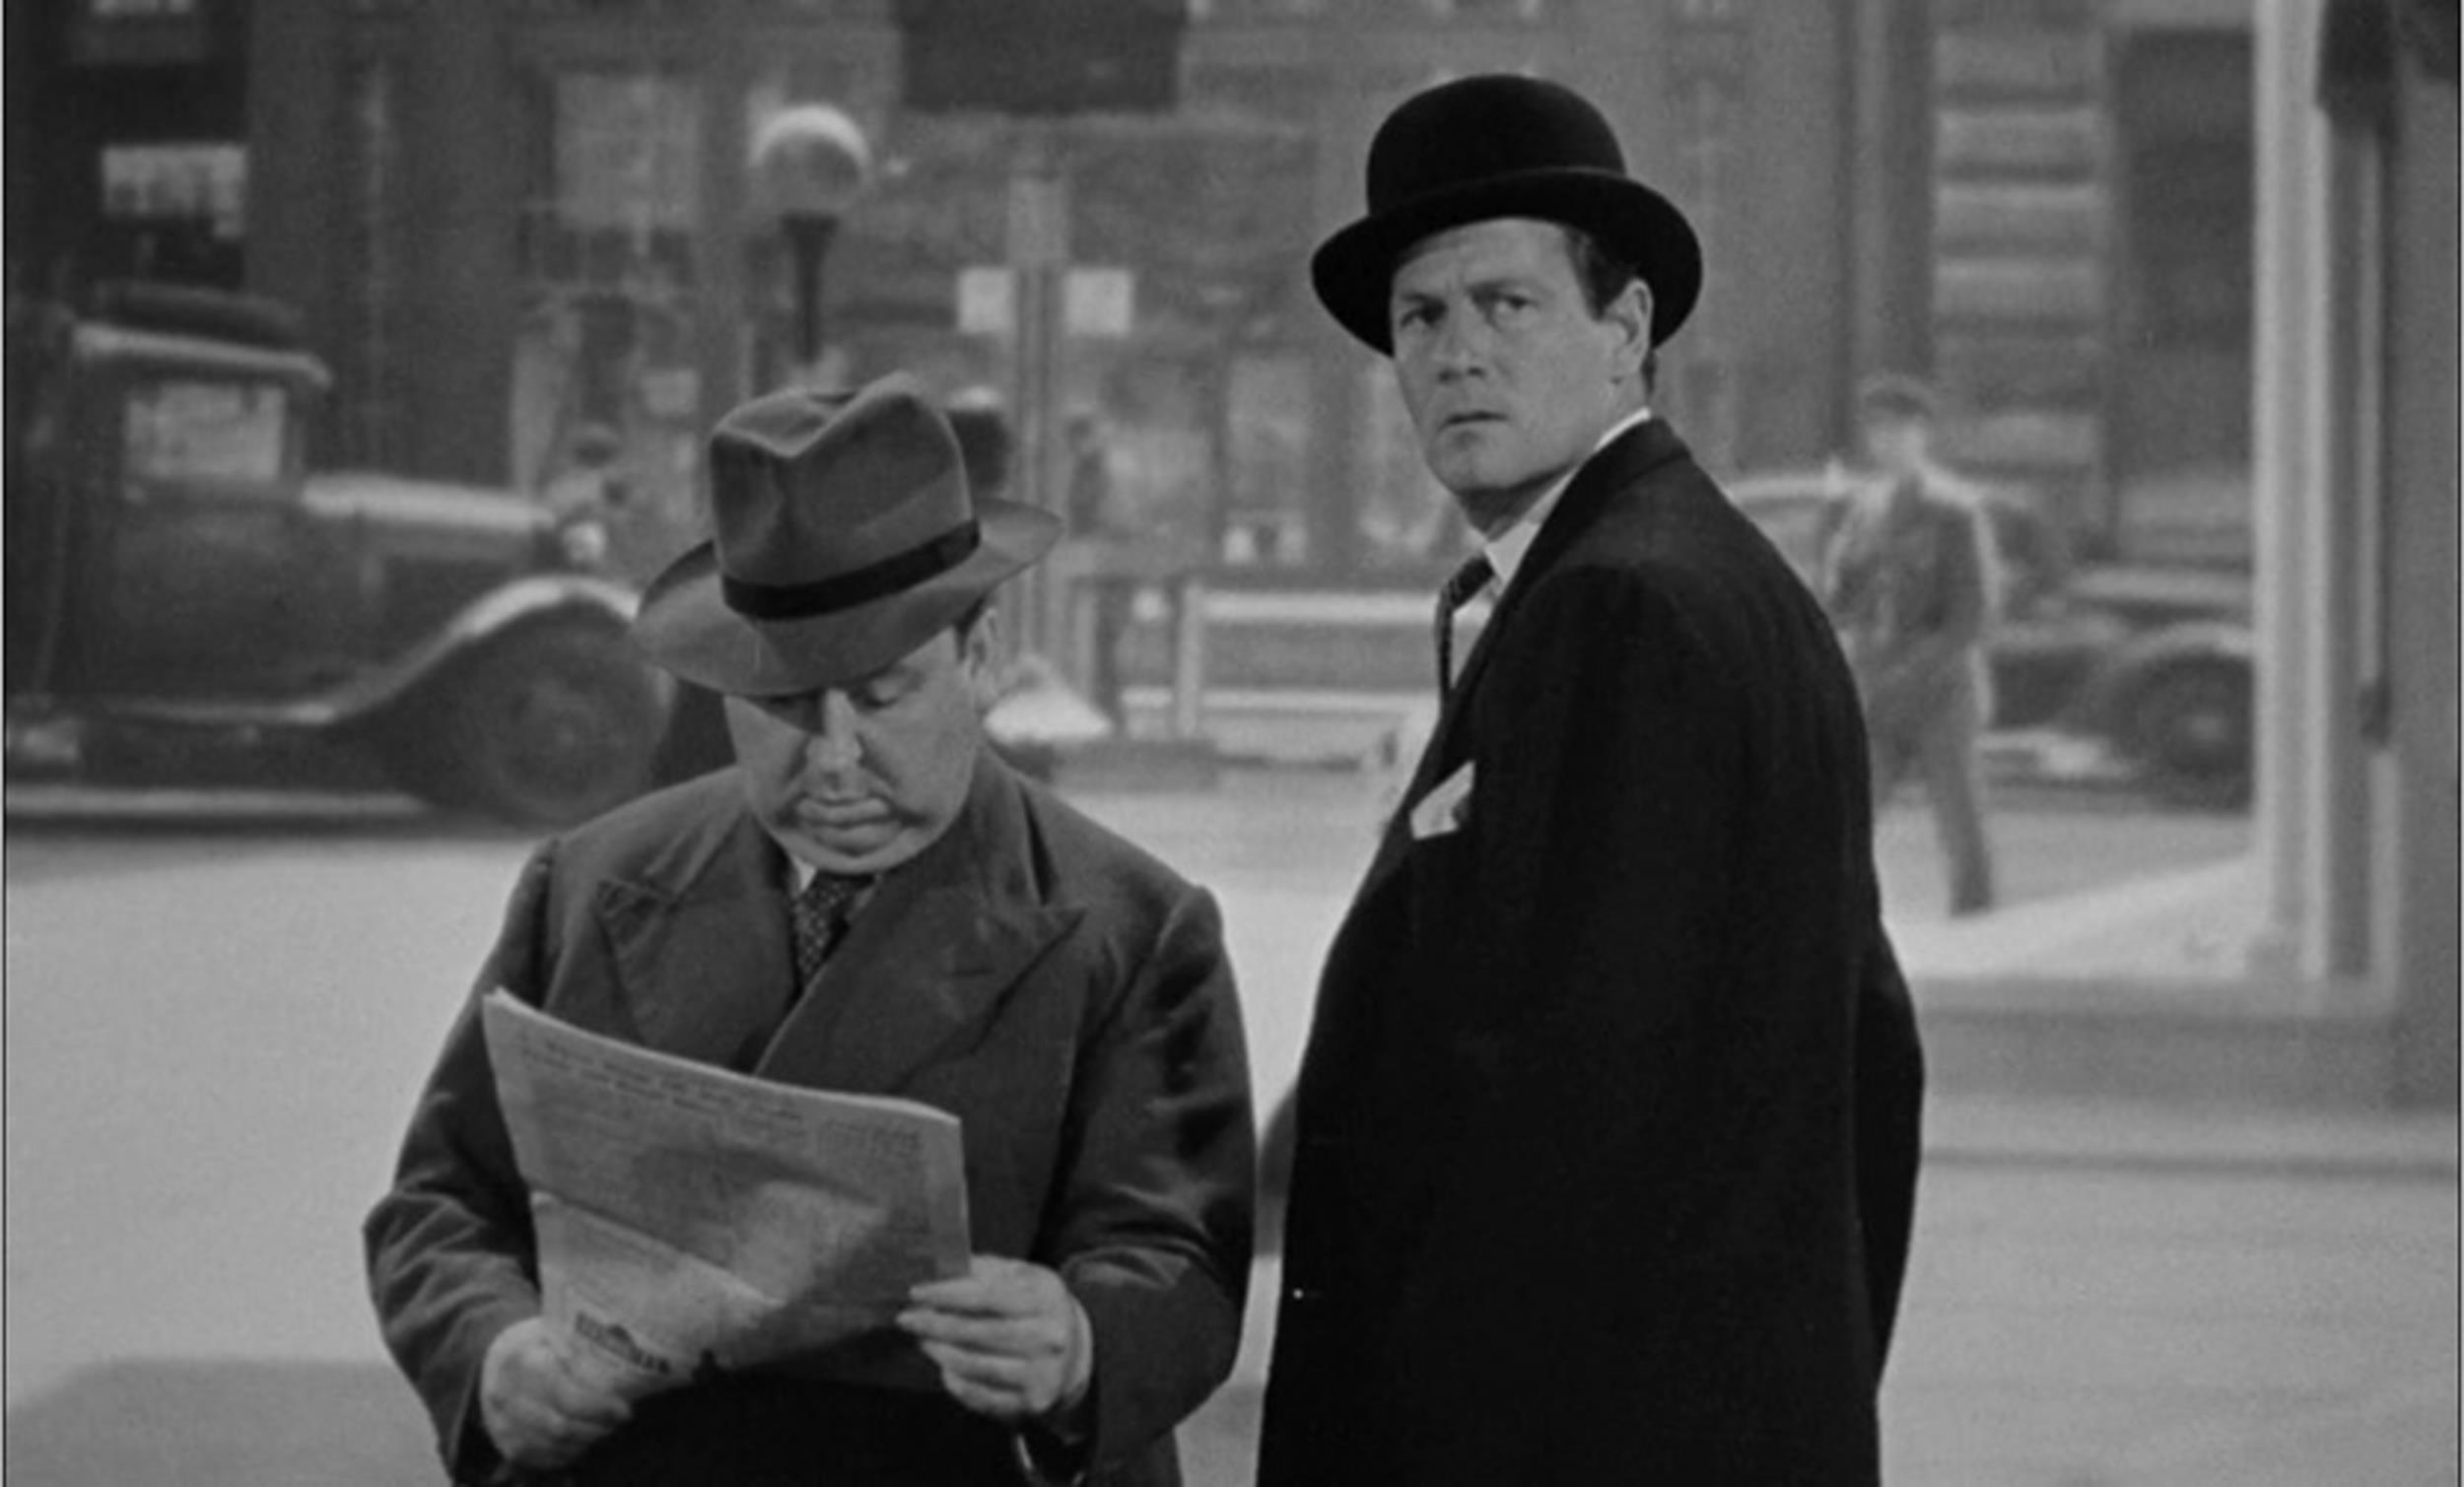 <p>Star Joel McRea is walking one way down the street, and here comes Hitchcock walking the other way. Now in America, Hitch has set aside the bowler hat he often wore in his British films for a more robust hat. As he walks he’s reading a newspaper which seems dangerous, especially in a Hitchcock film.</p>